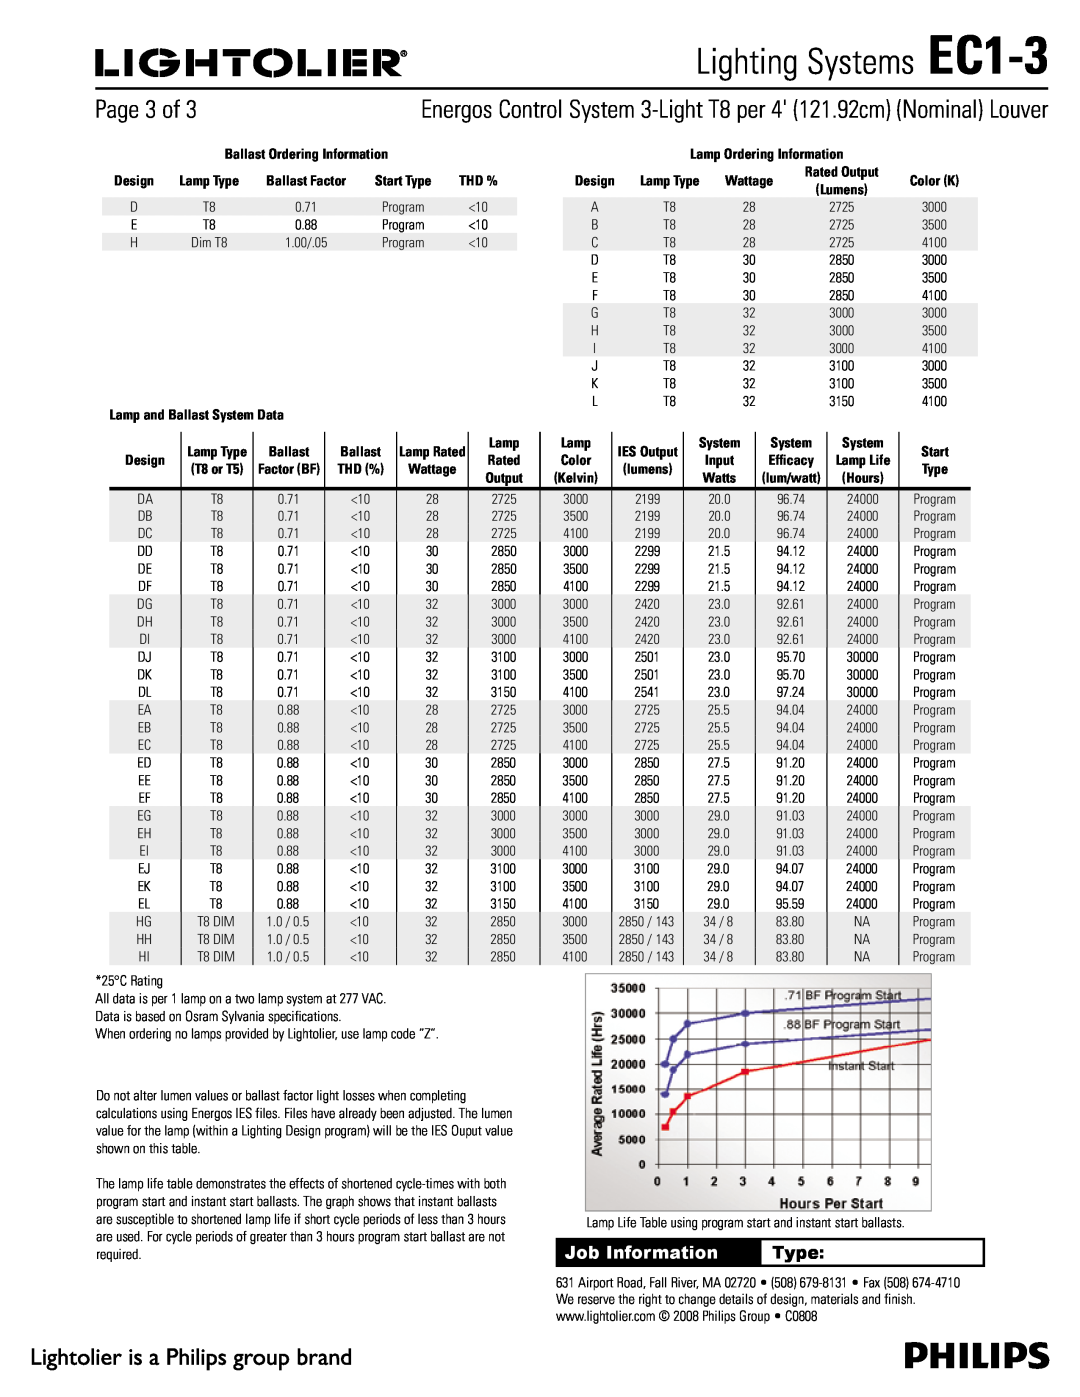 Lightolier specifications Page 3 of, Lighting Systems EC1-3, Job Information, Type, Lamp Ordering Information, Wattage 